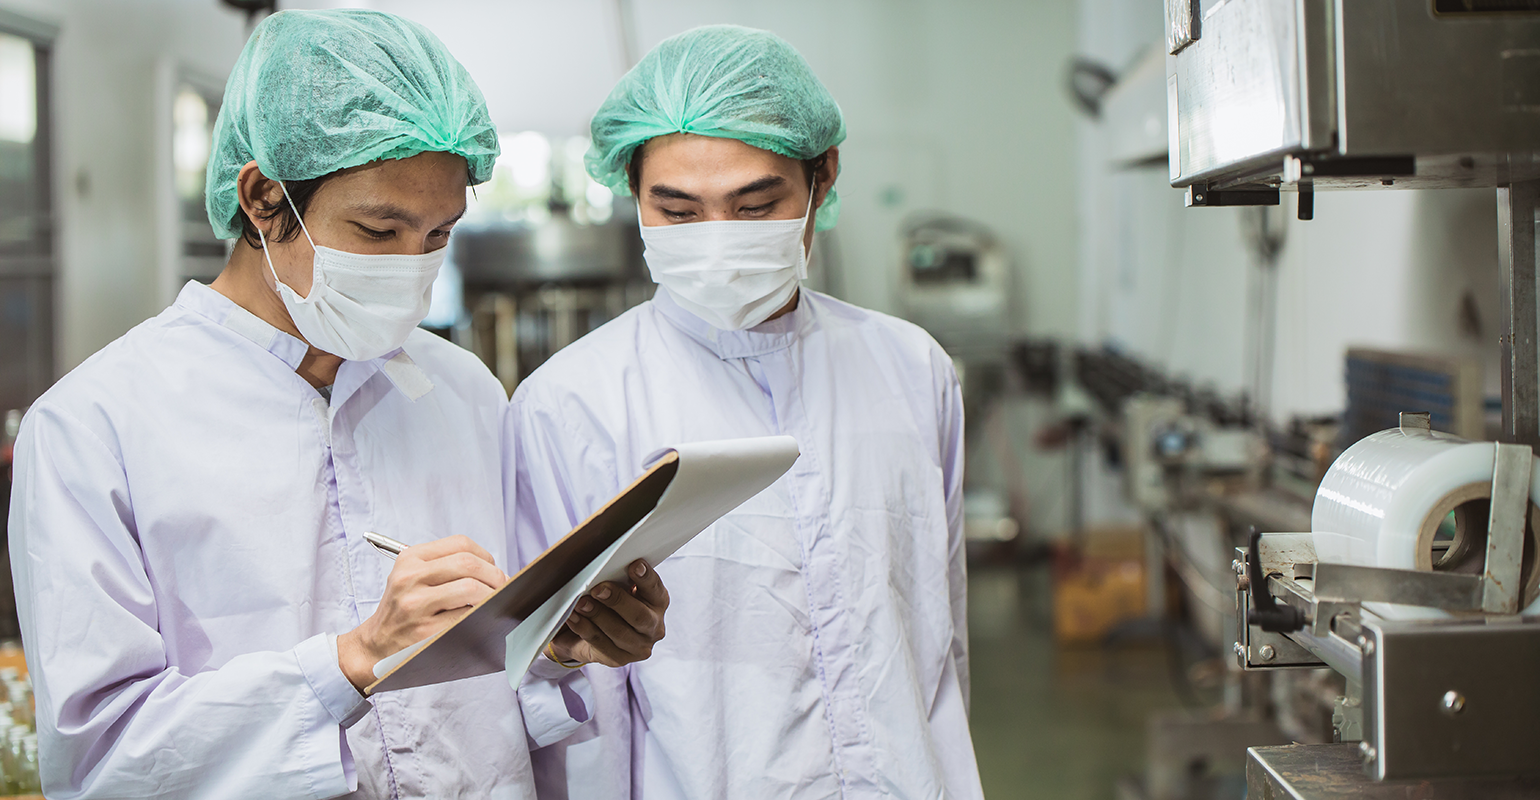 Supply chain solutions 2023, part 2: Spotlight on food safety and quality